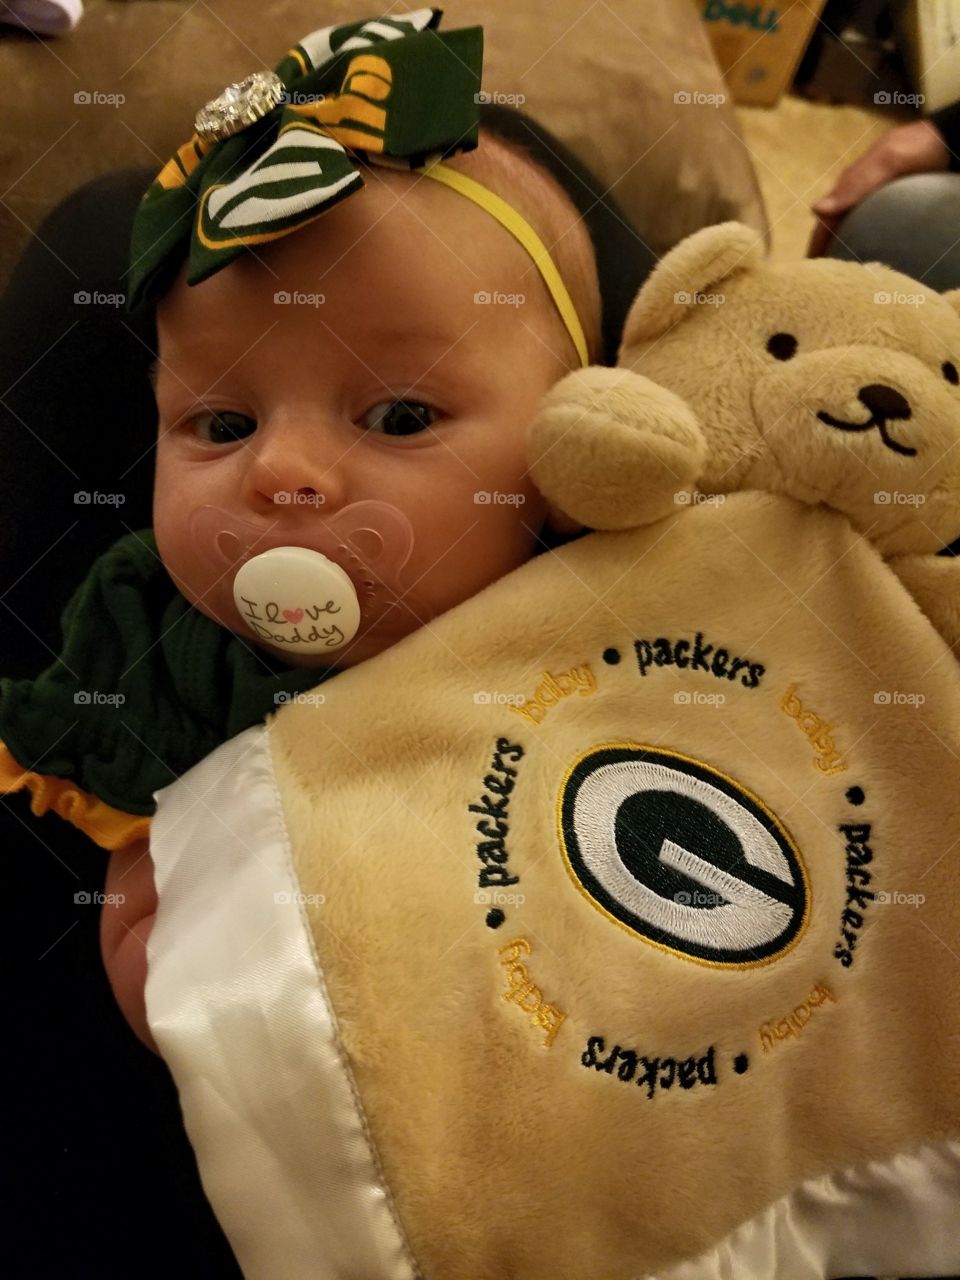 Green Bay Packers baby!